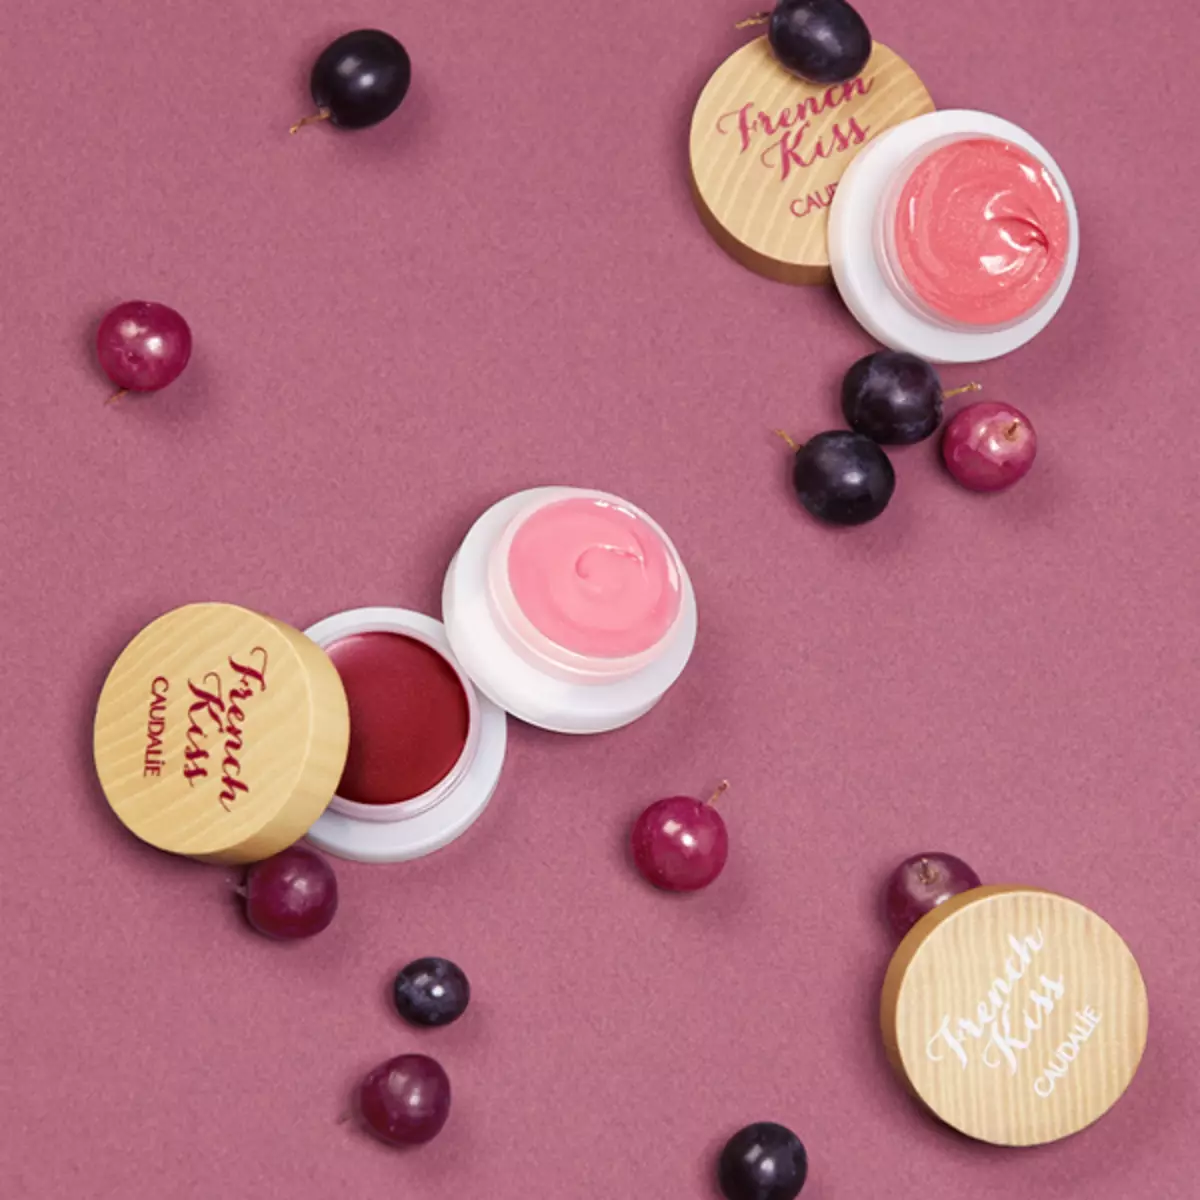 New palette of varnishes, autumn fragrance, lip balms and a whole 